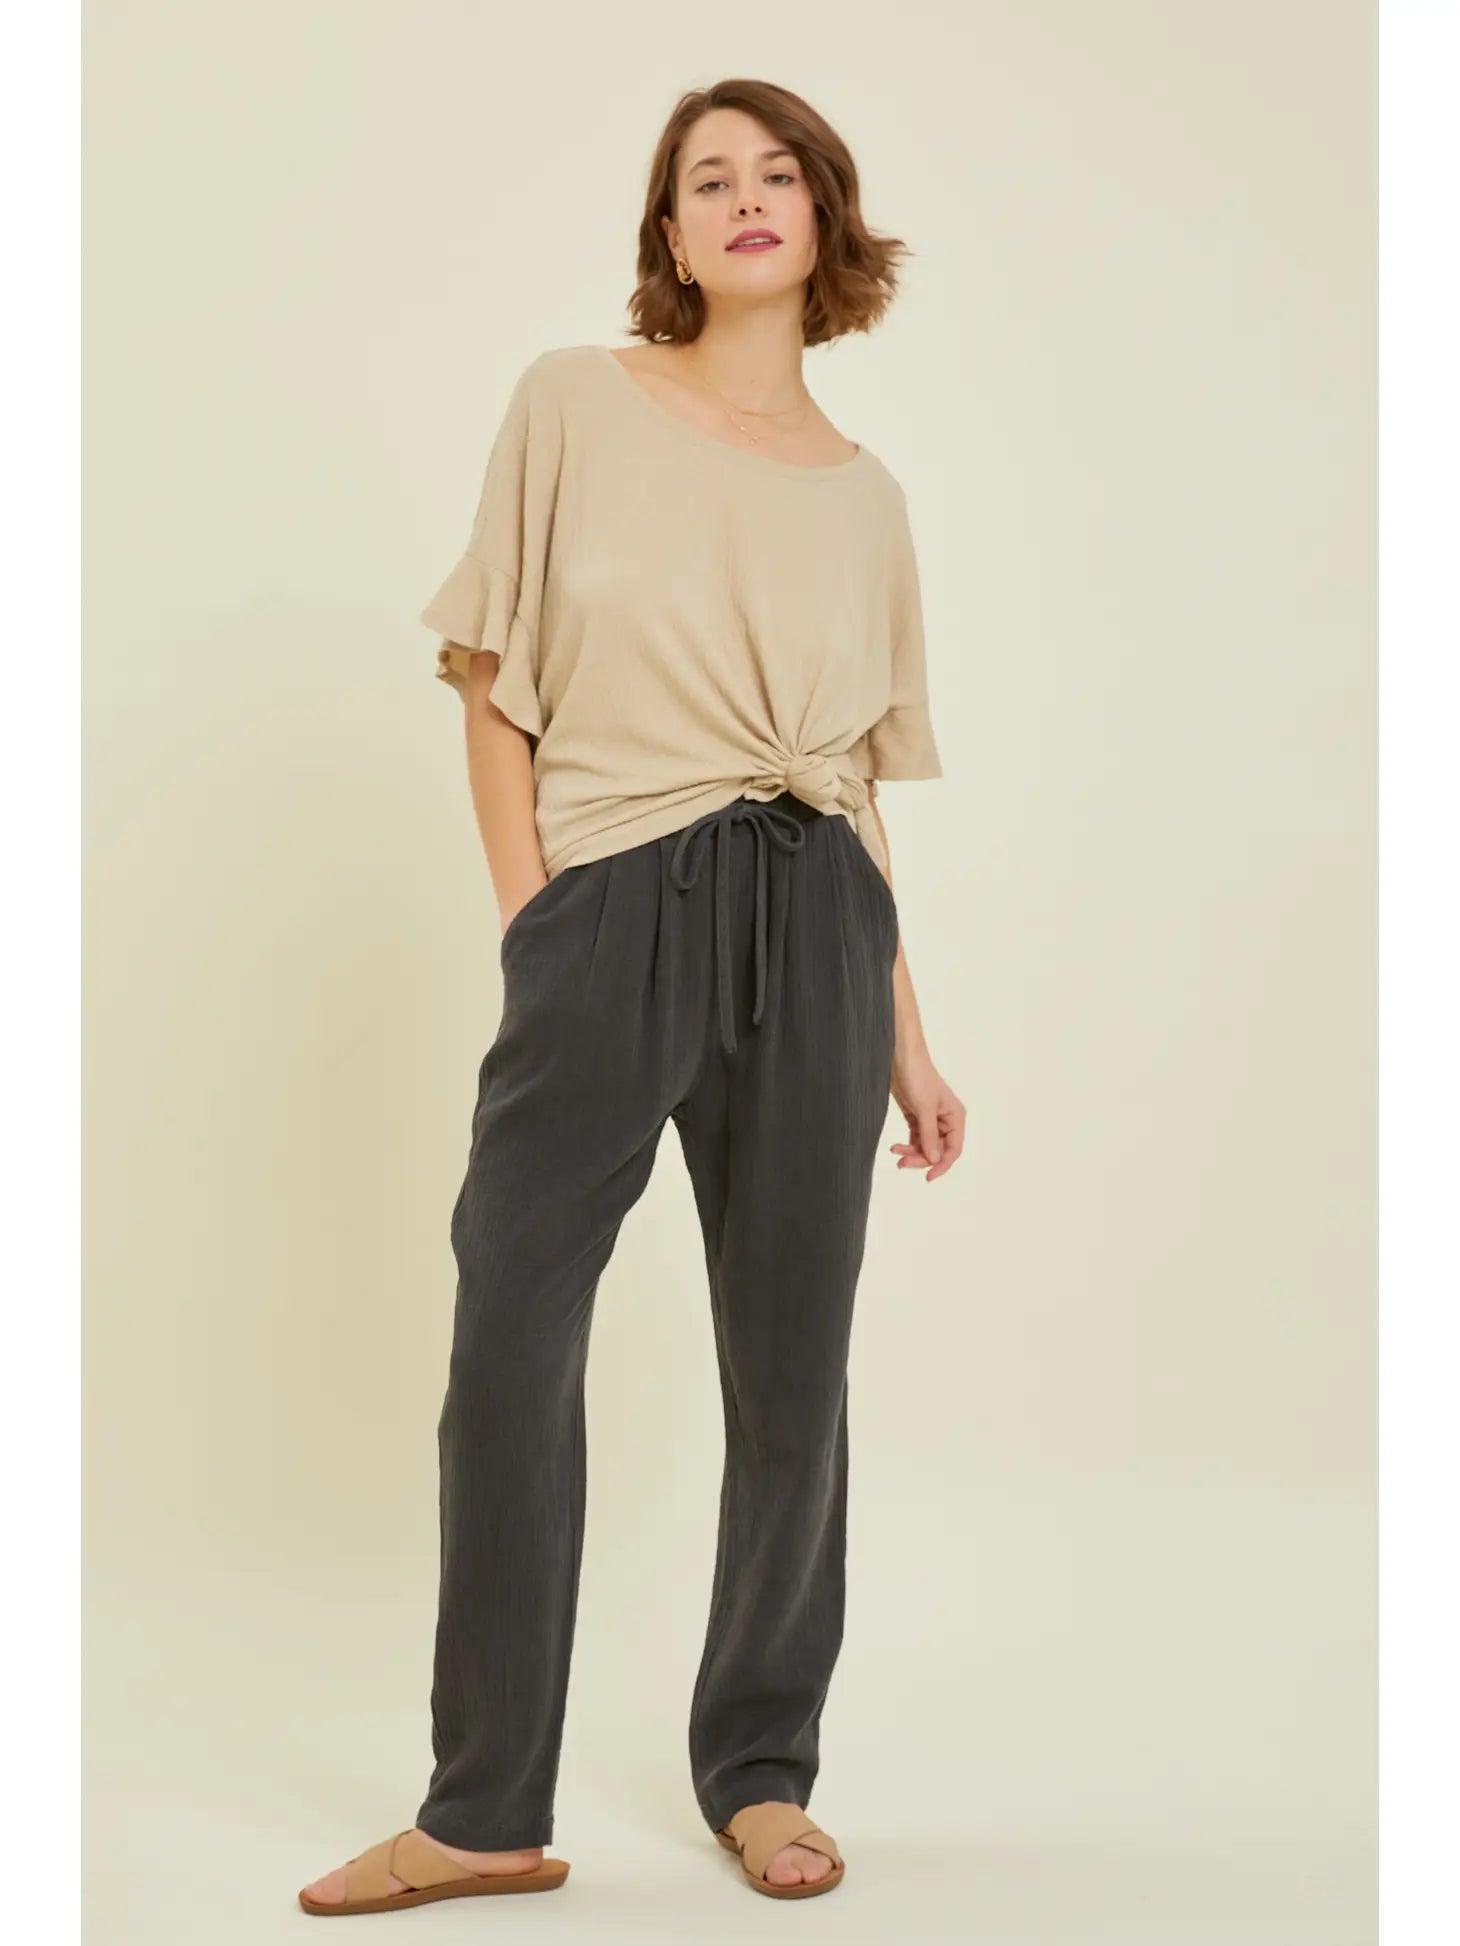 Mineral- Washed Cotton Pant